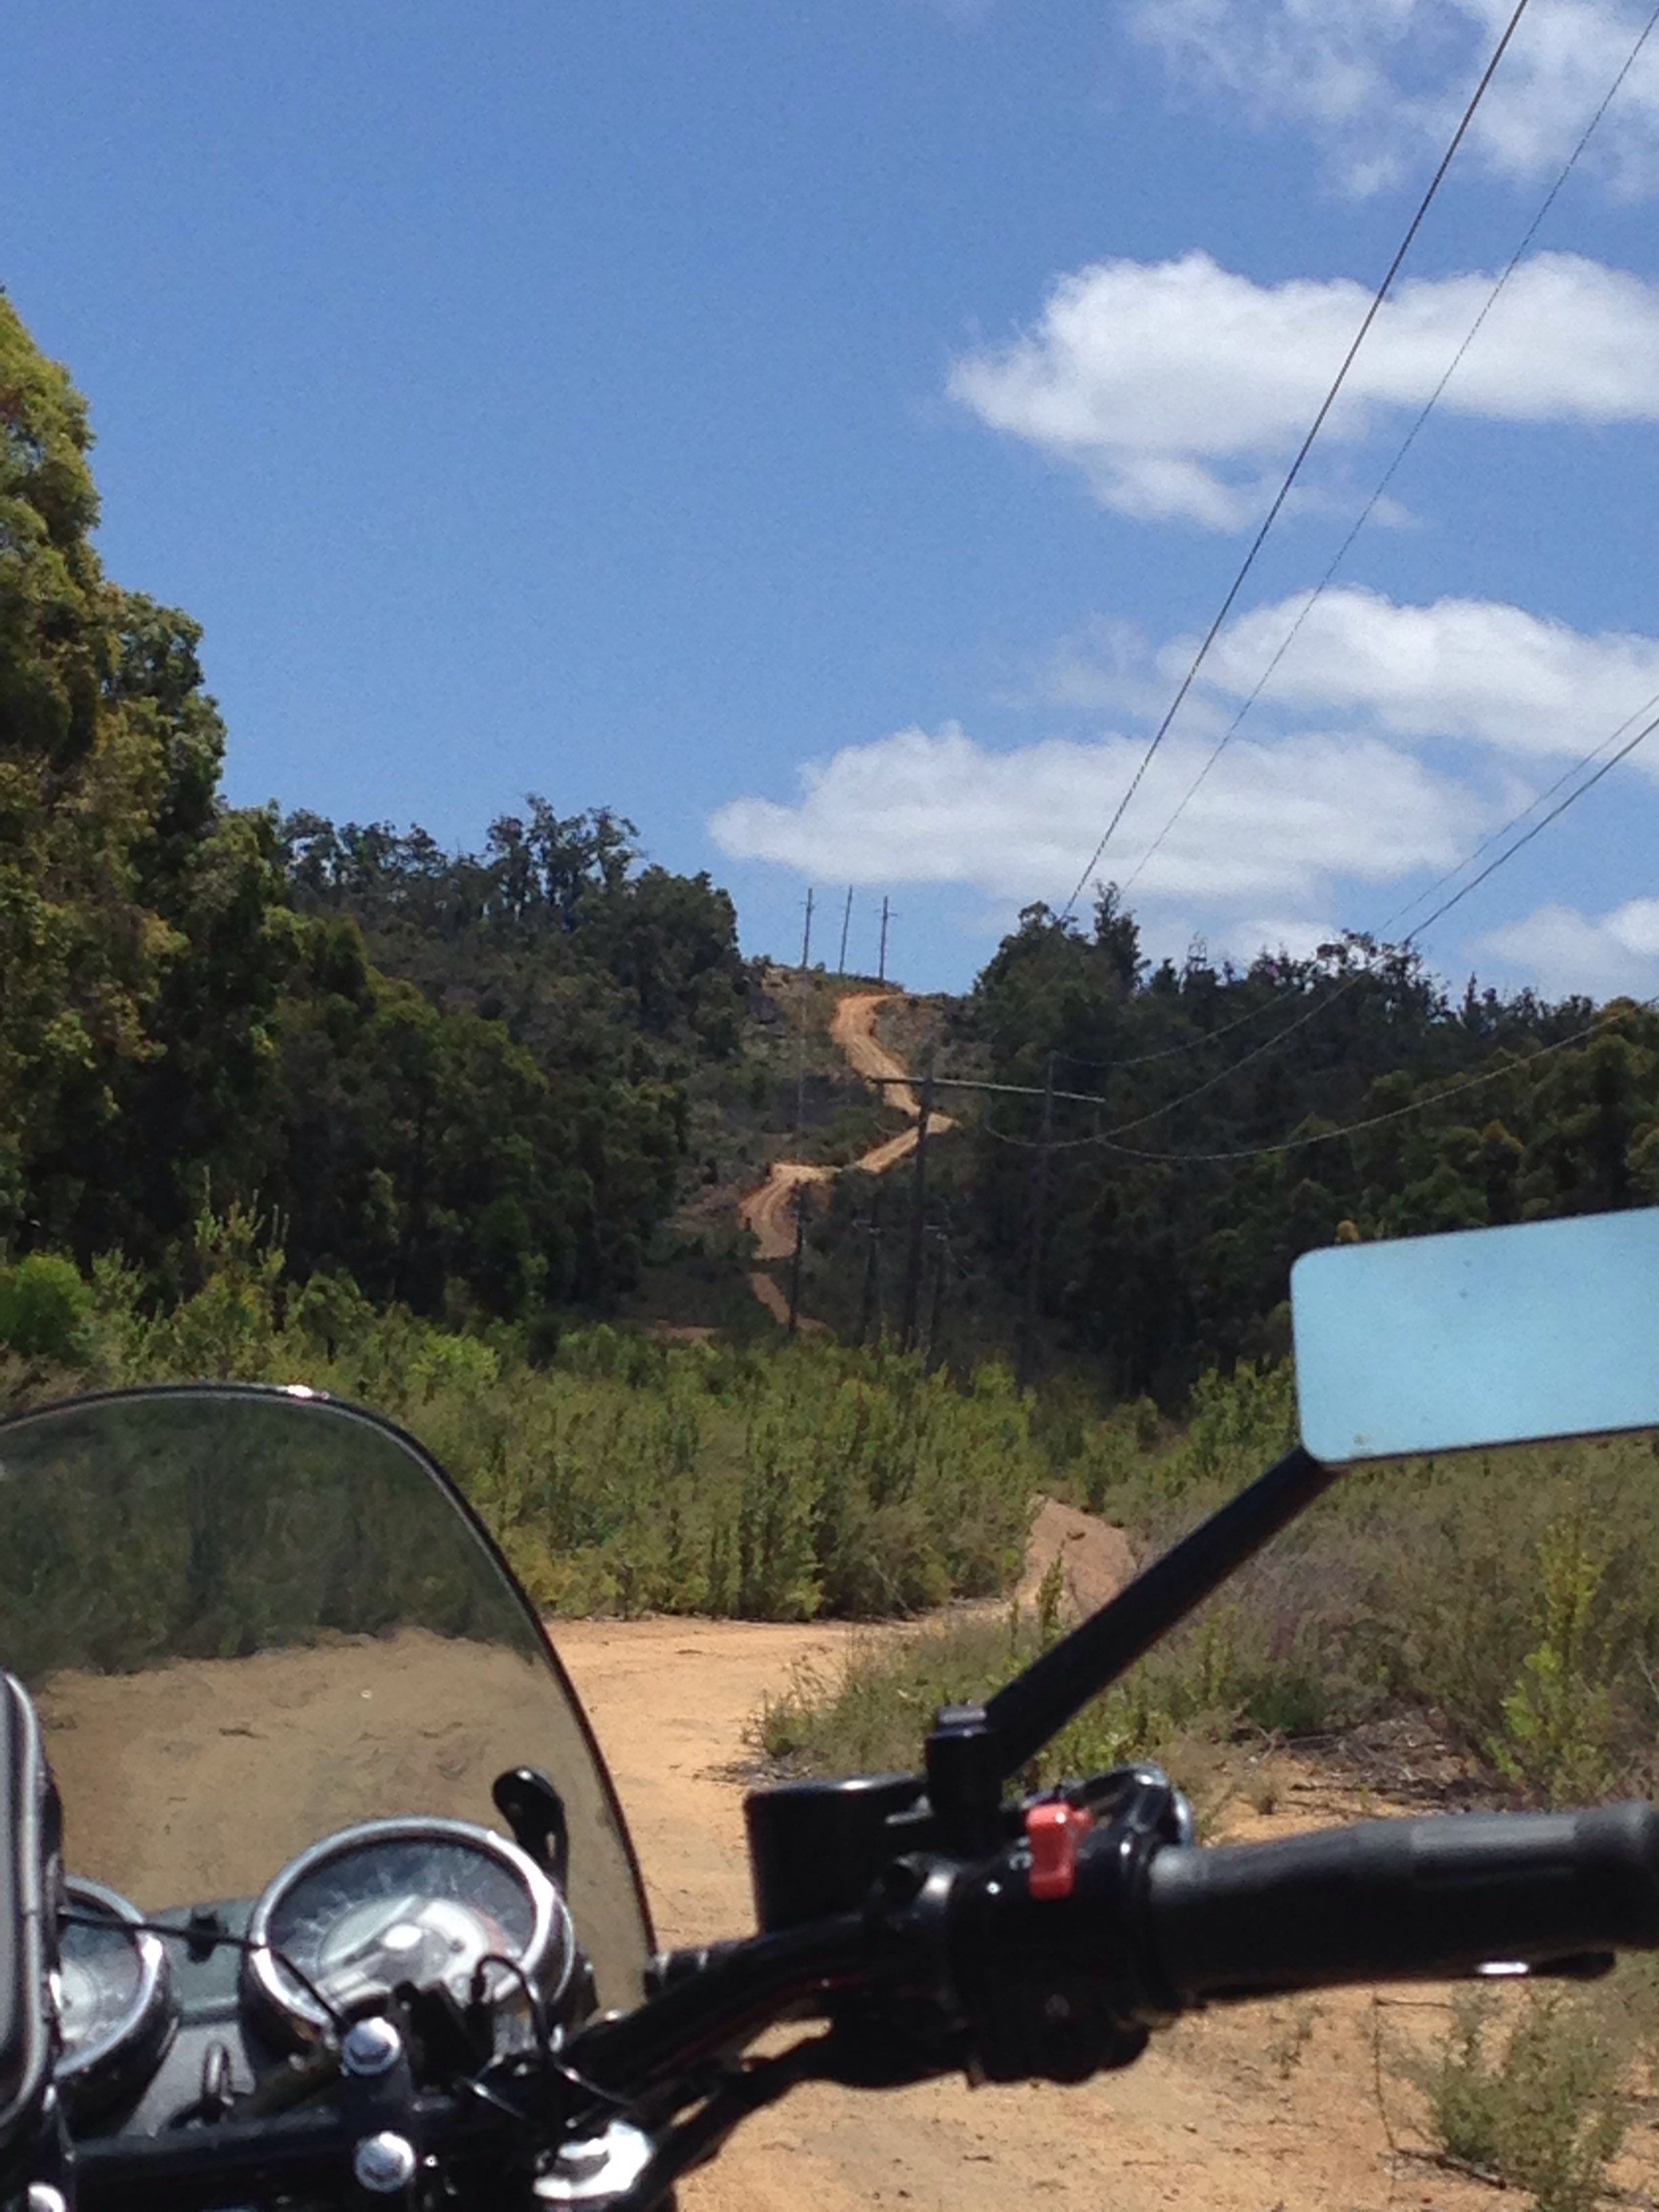 The big hill with 4wd rutts that knakkkered me